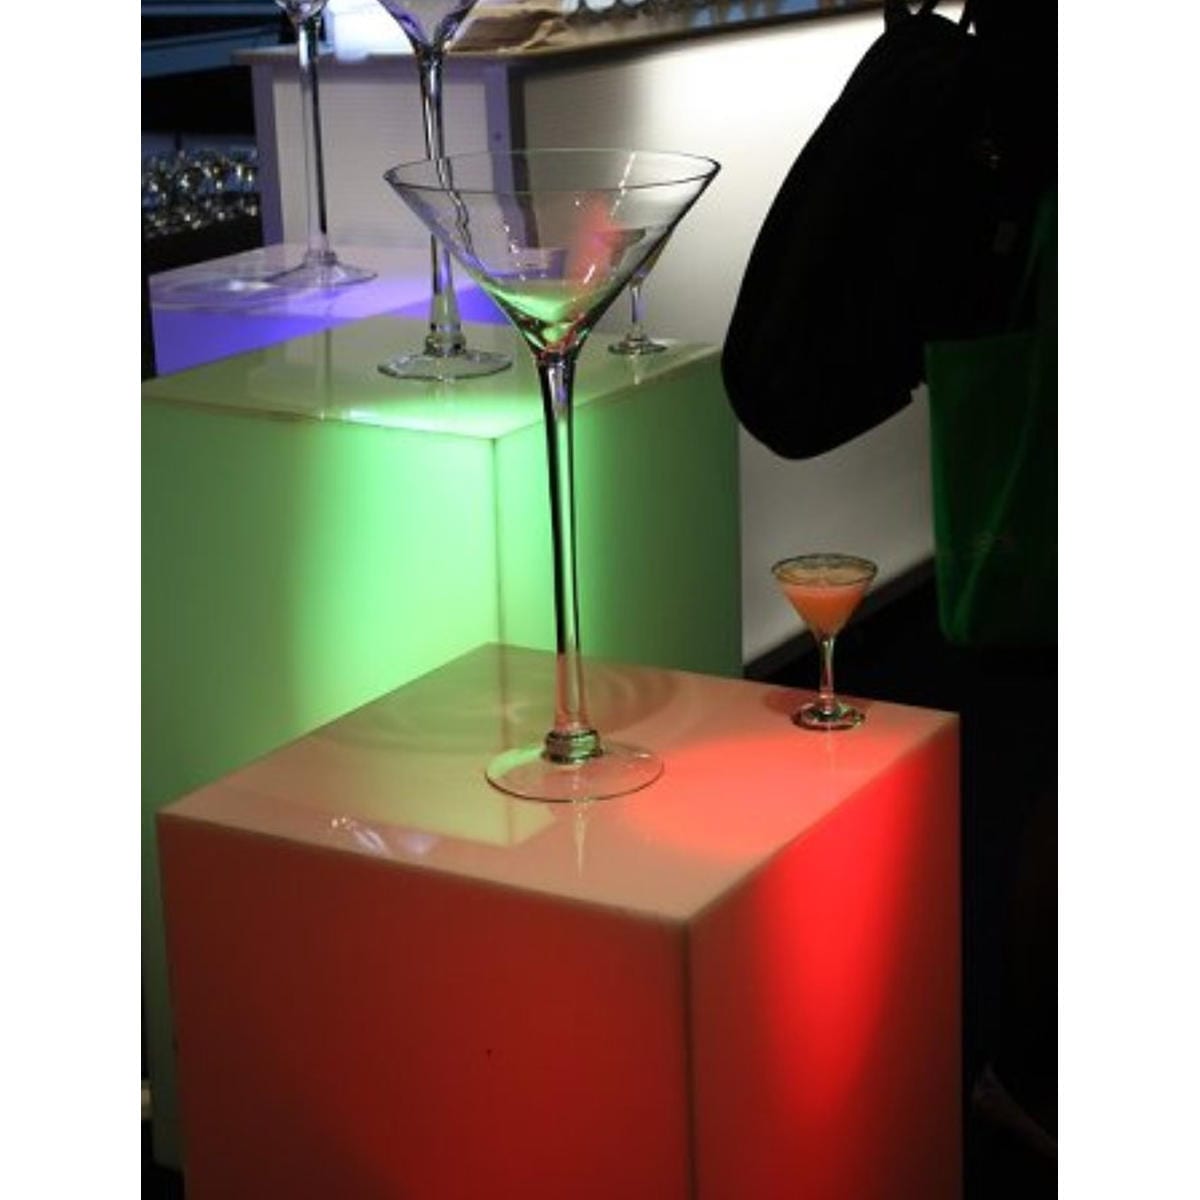 taal Periodiek Onzuiver Giant Martini Glass